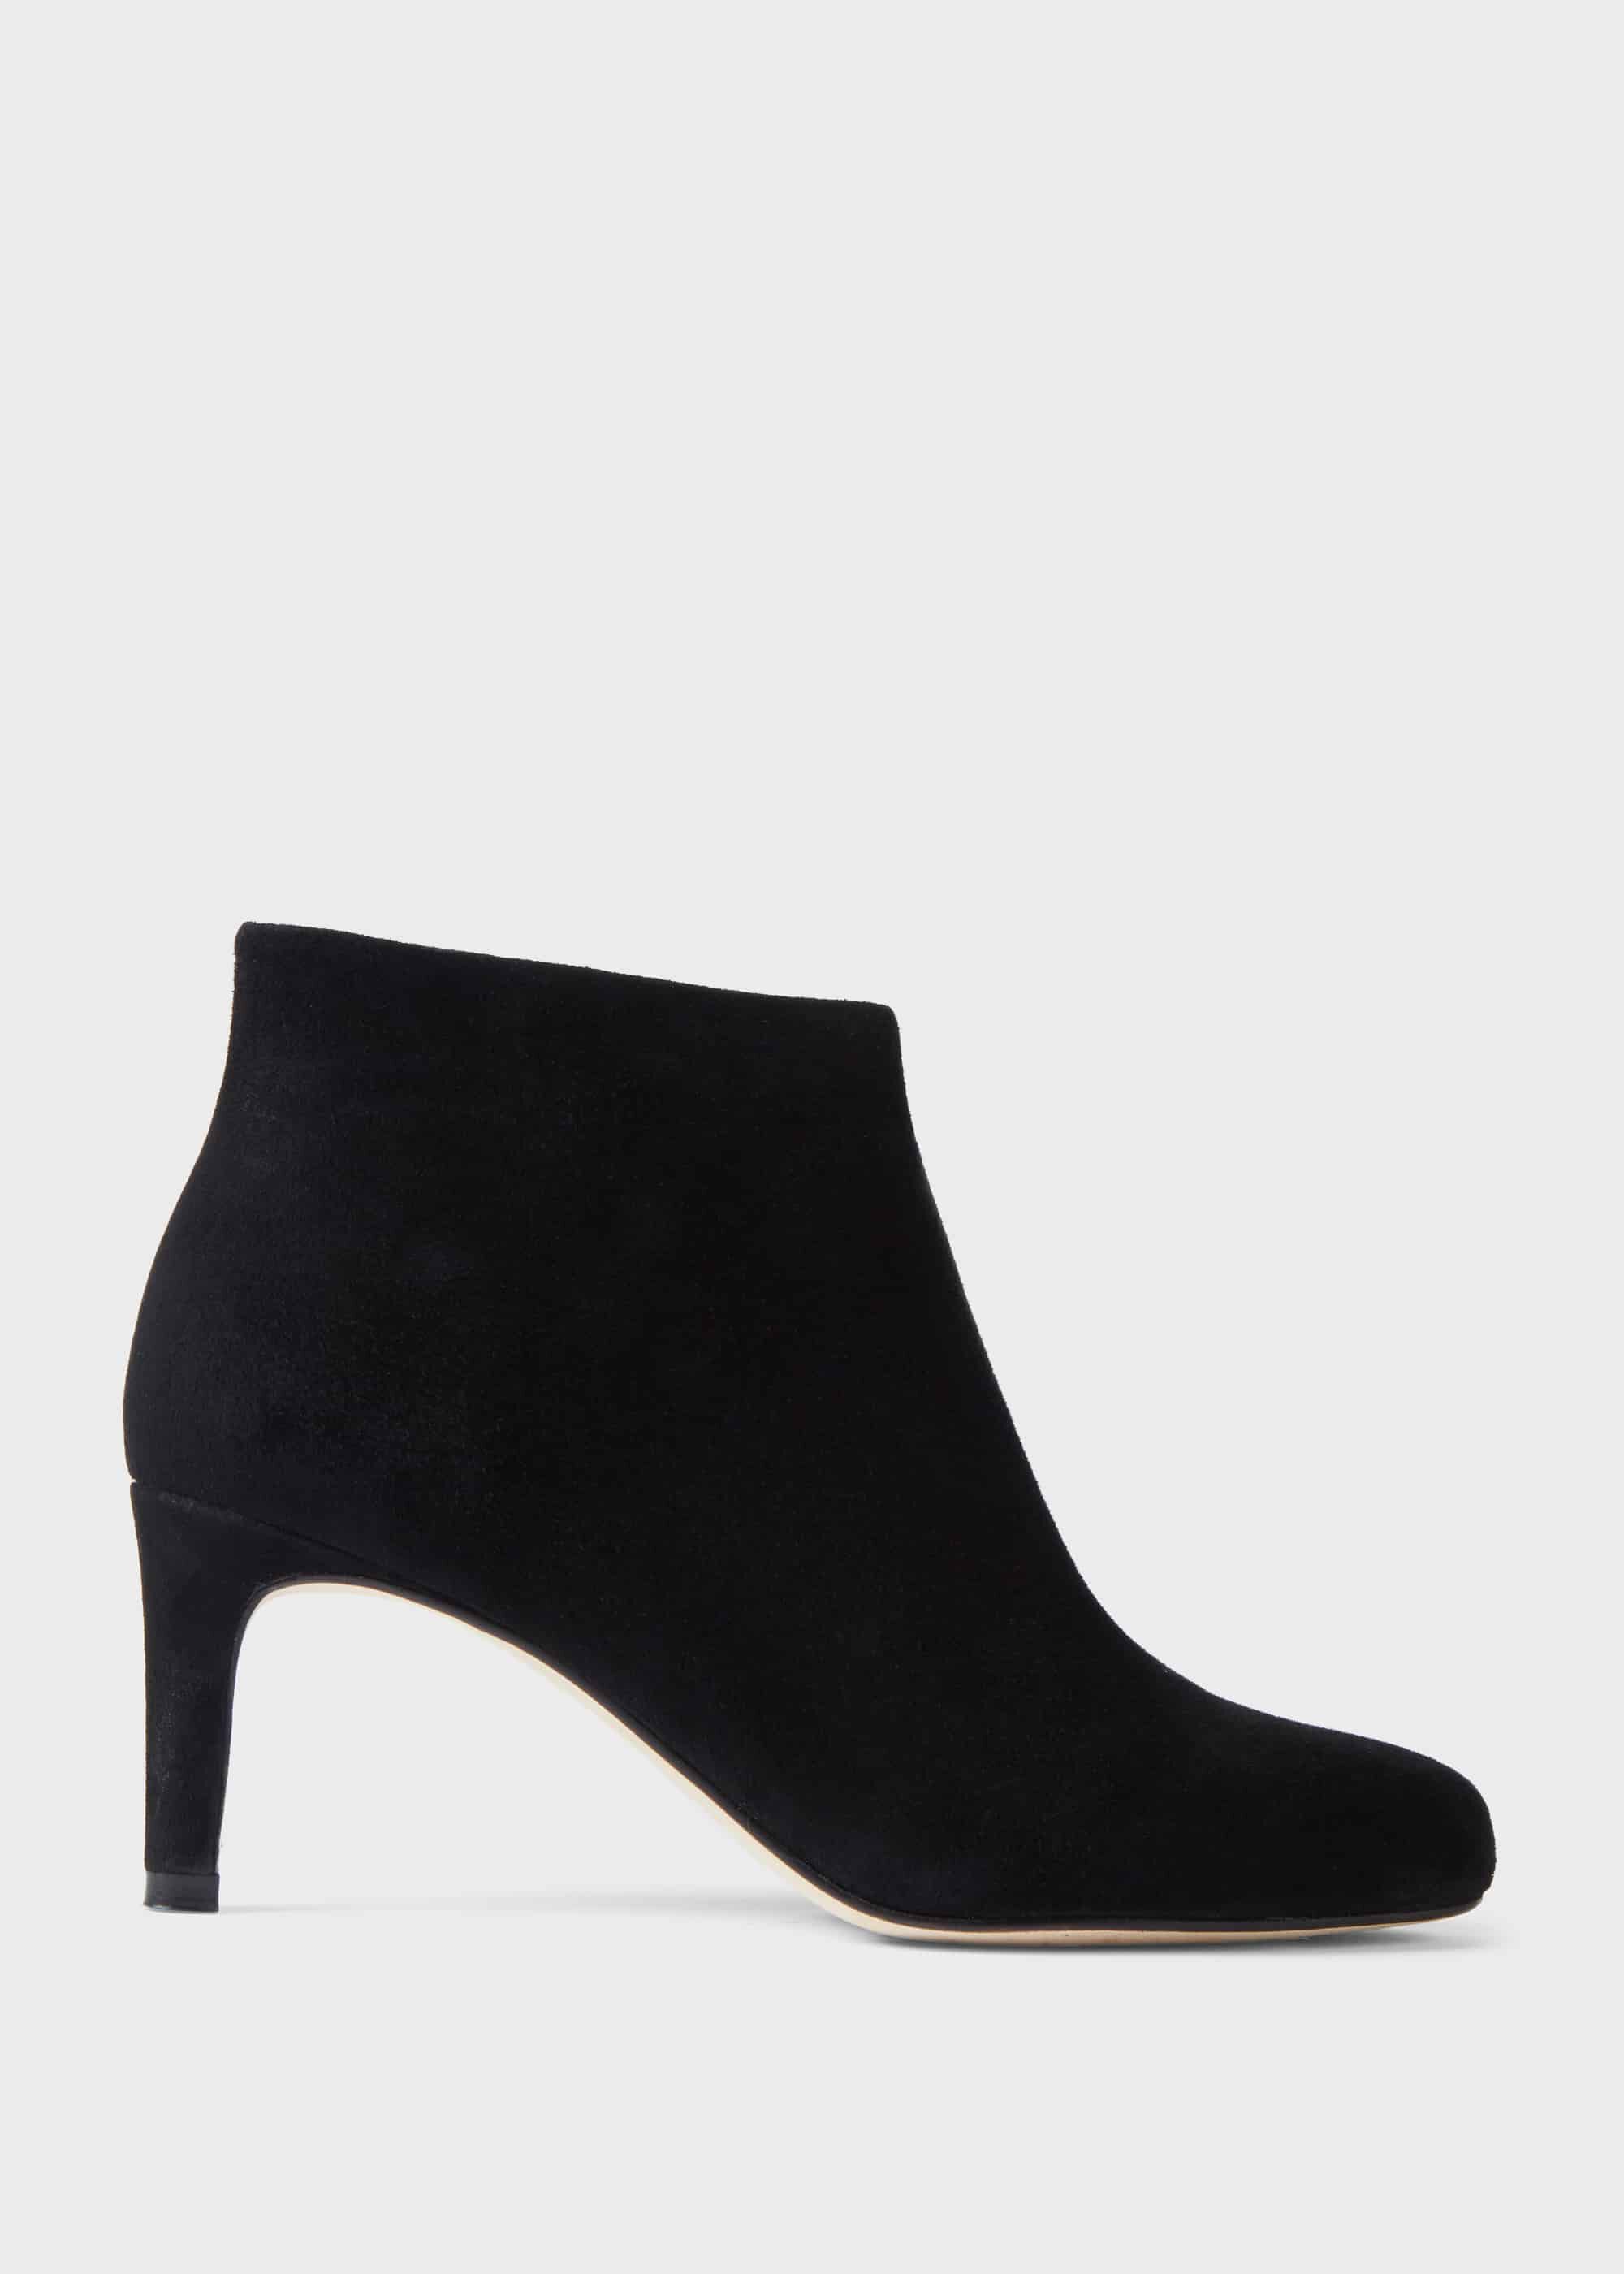 hobbs navy ankle boots